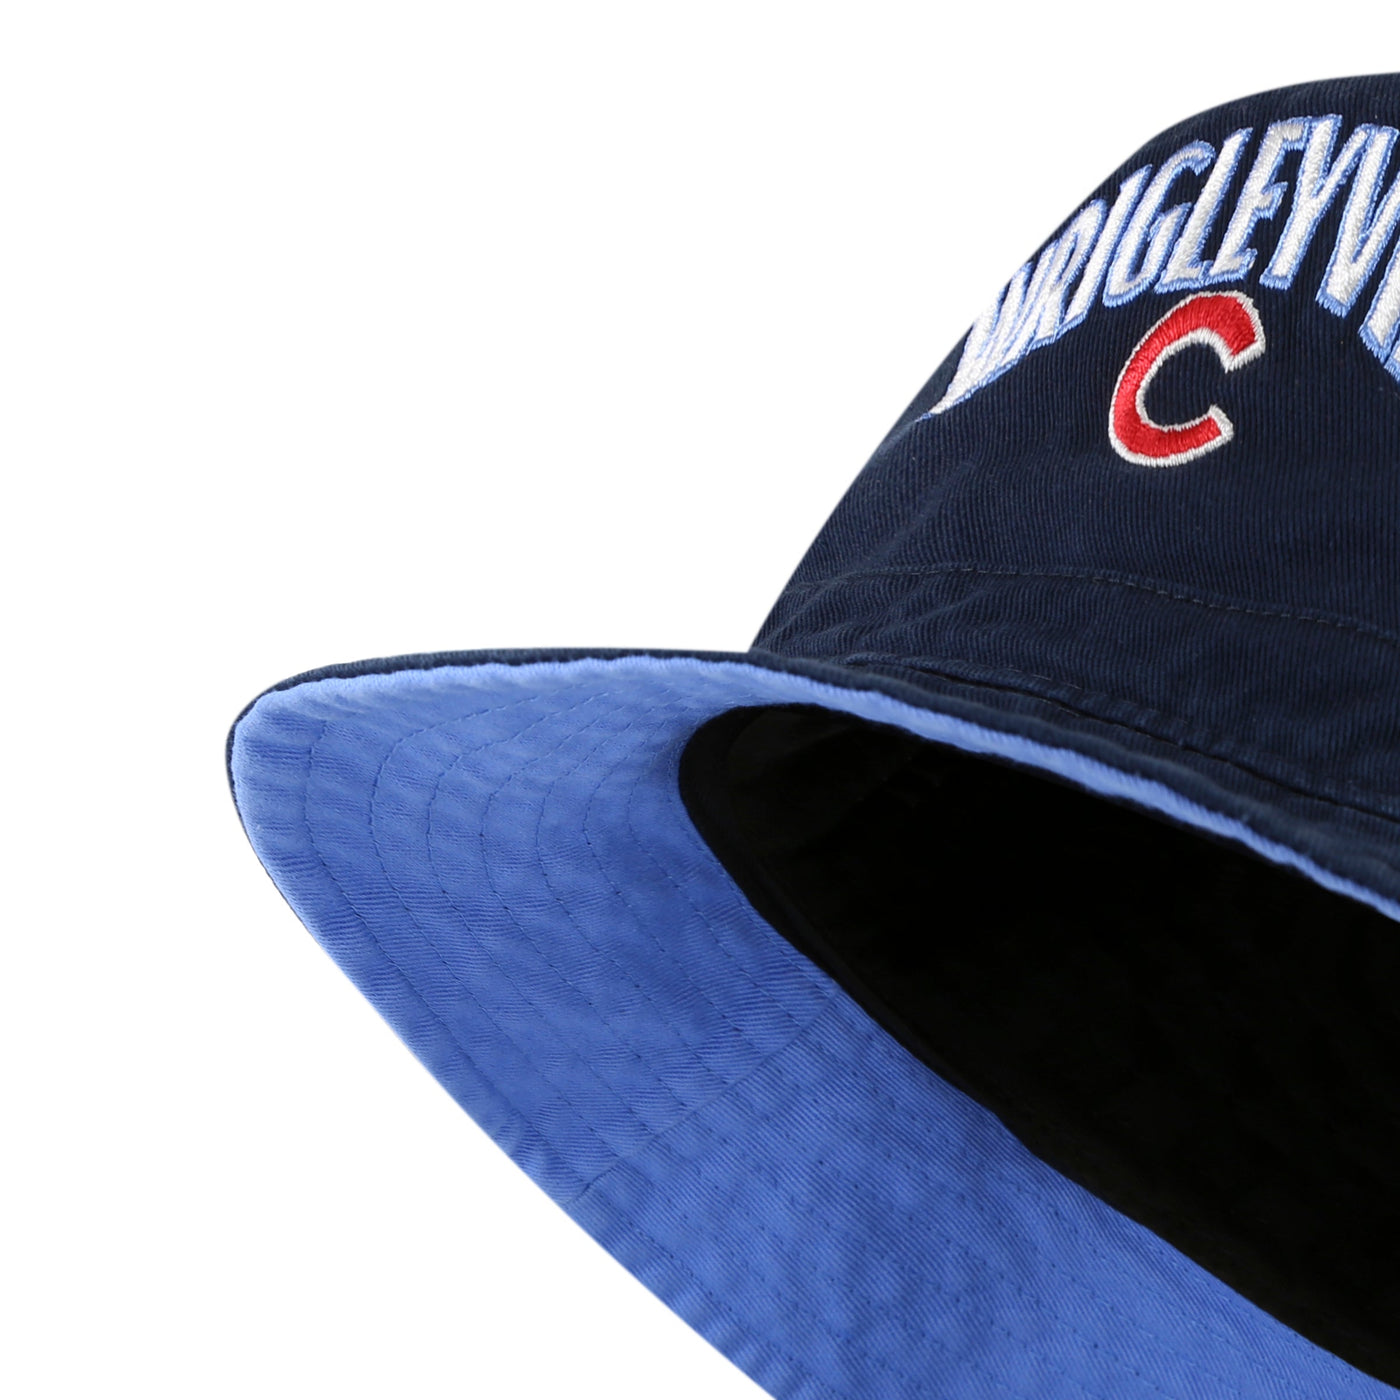 Chicago Cubs, Accessories, Vintage Chicago Cubs Hat